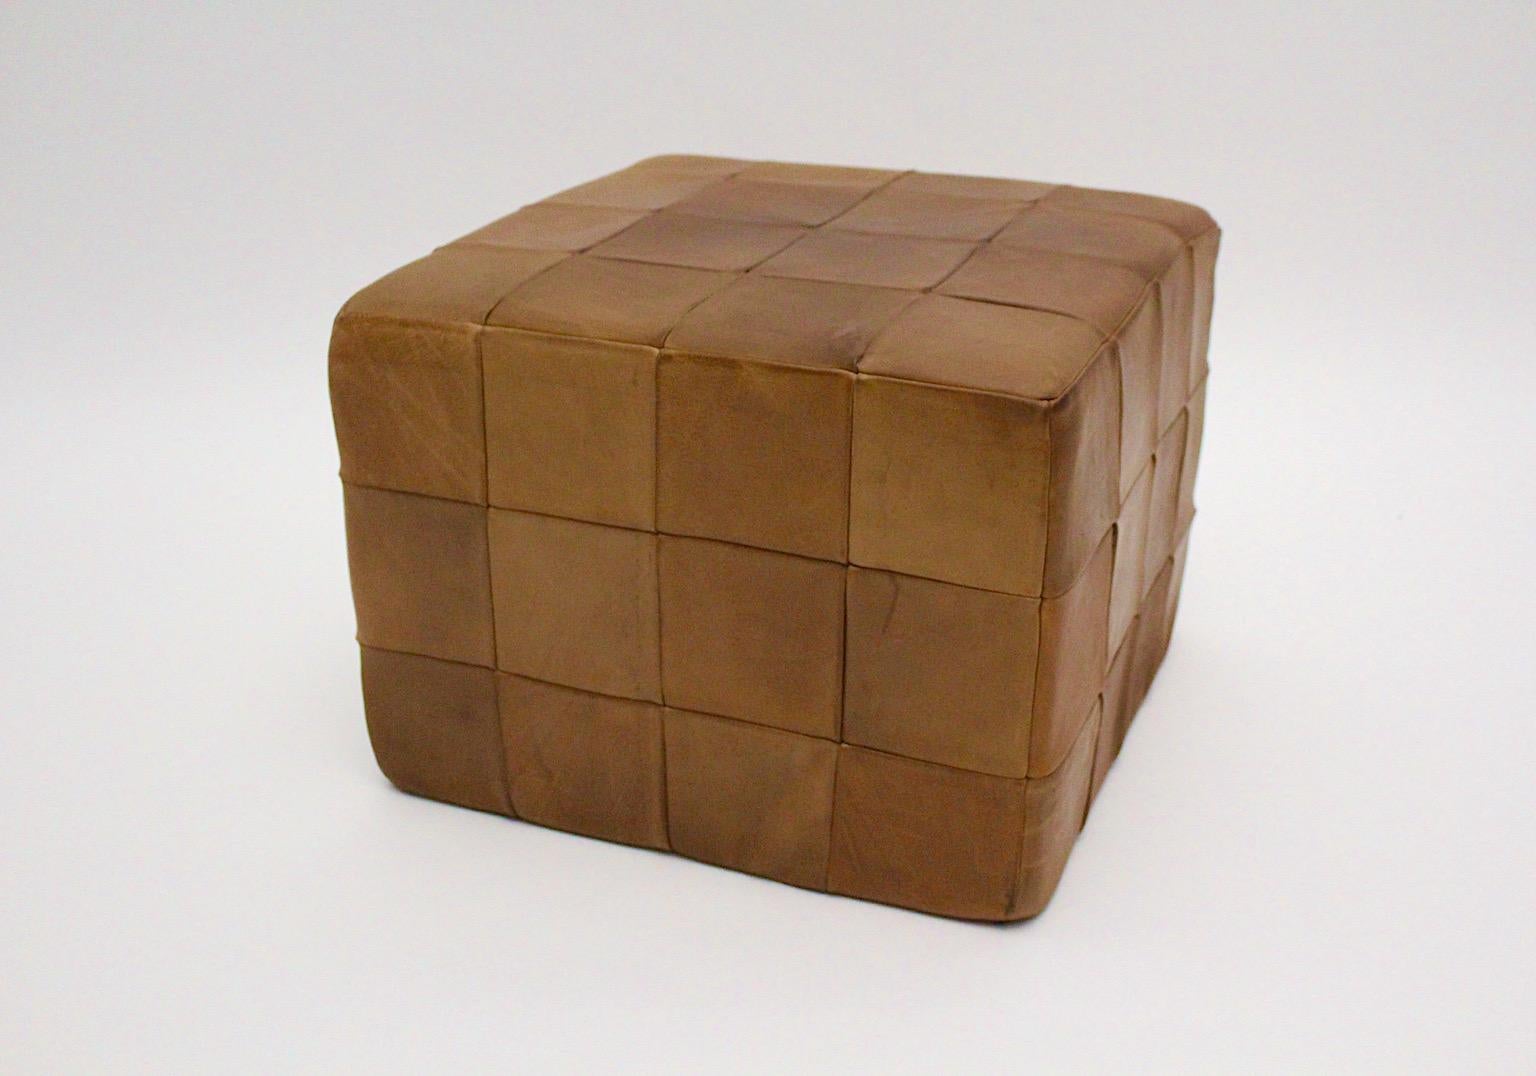 Modernist Organic Vintage Brown Patchwork Leather Cubus Stool DeSede 1970s For Sale 3